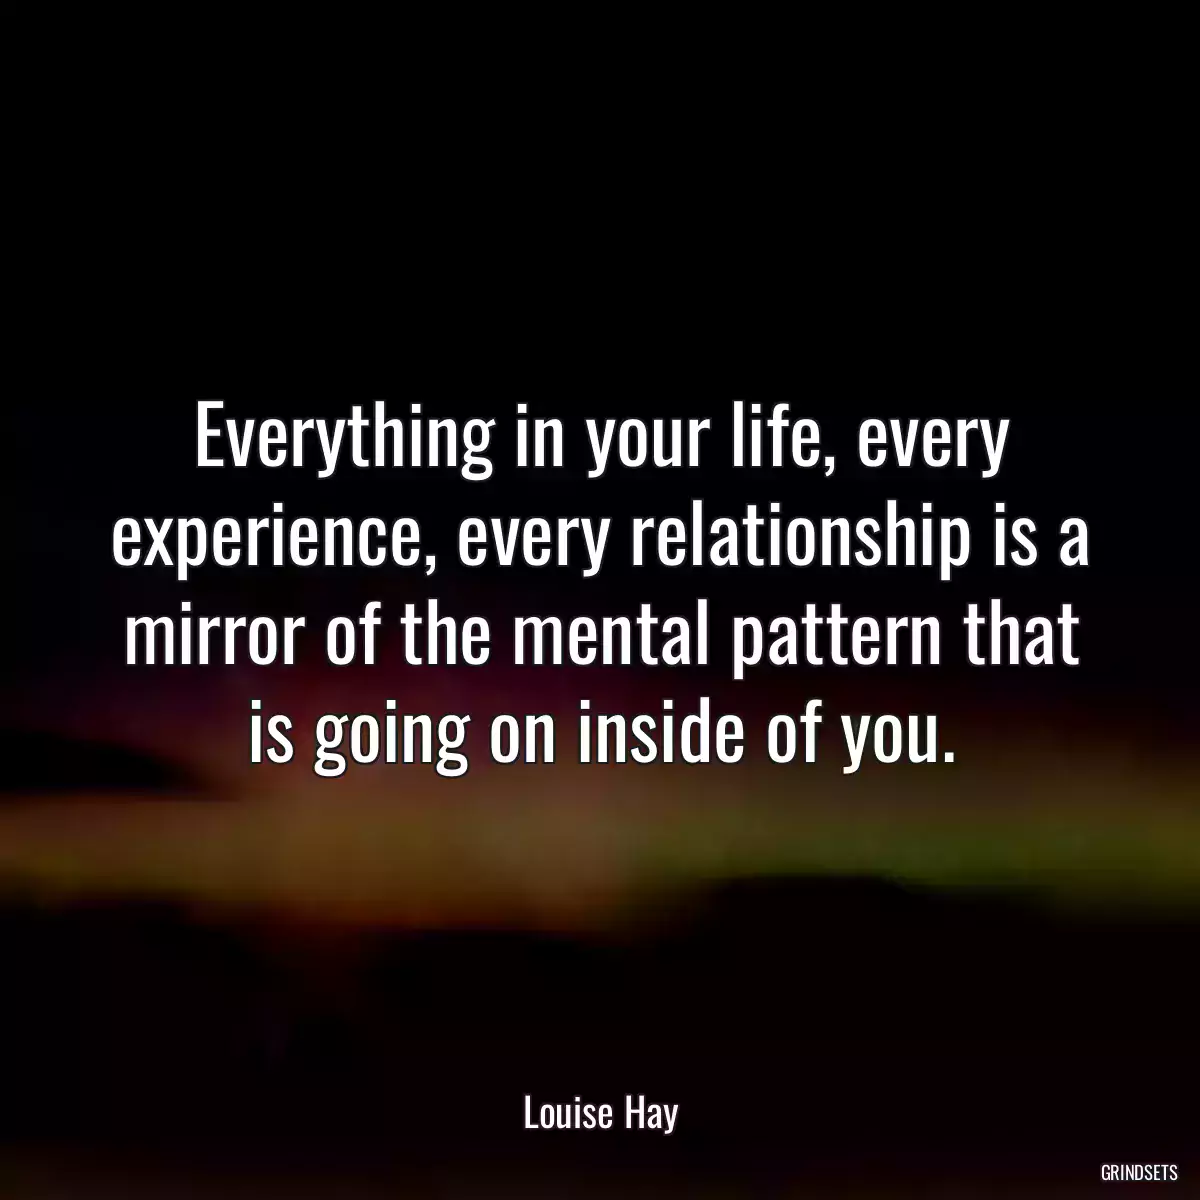 Everything in your life, every experience, every relationship is a mirror of the mental pattern that is going on inside of you.